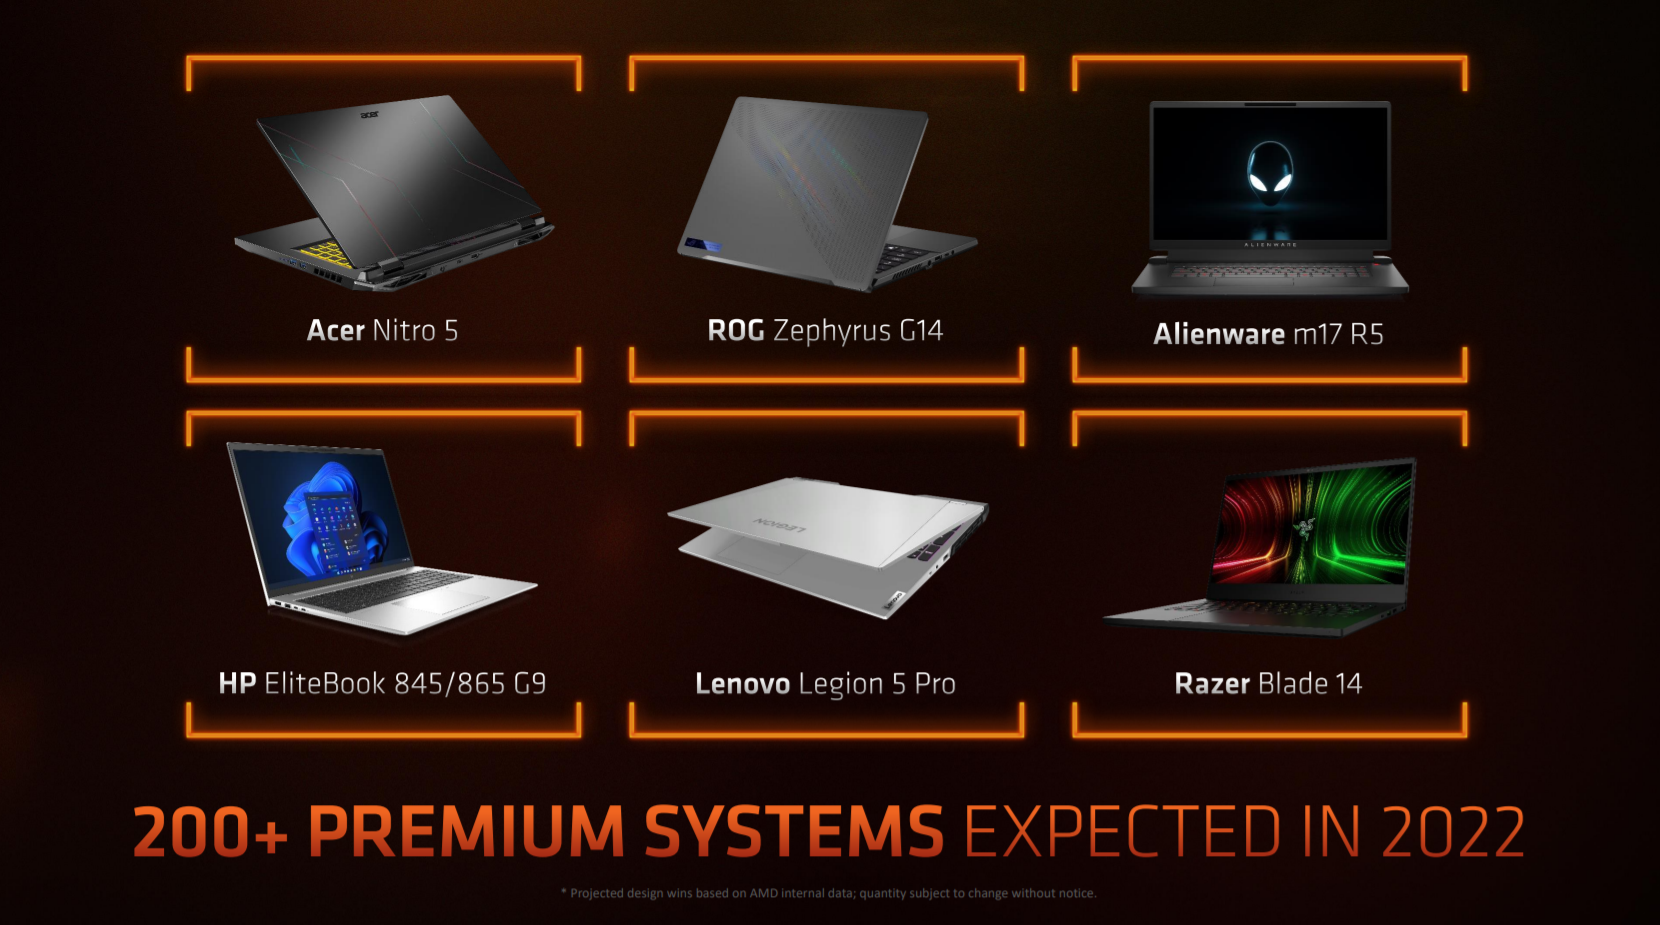 A slide showing six laptops expected to roll out with Ryzen 6000 processors.